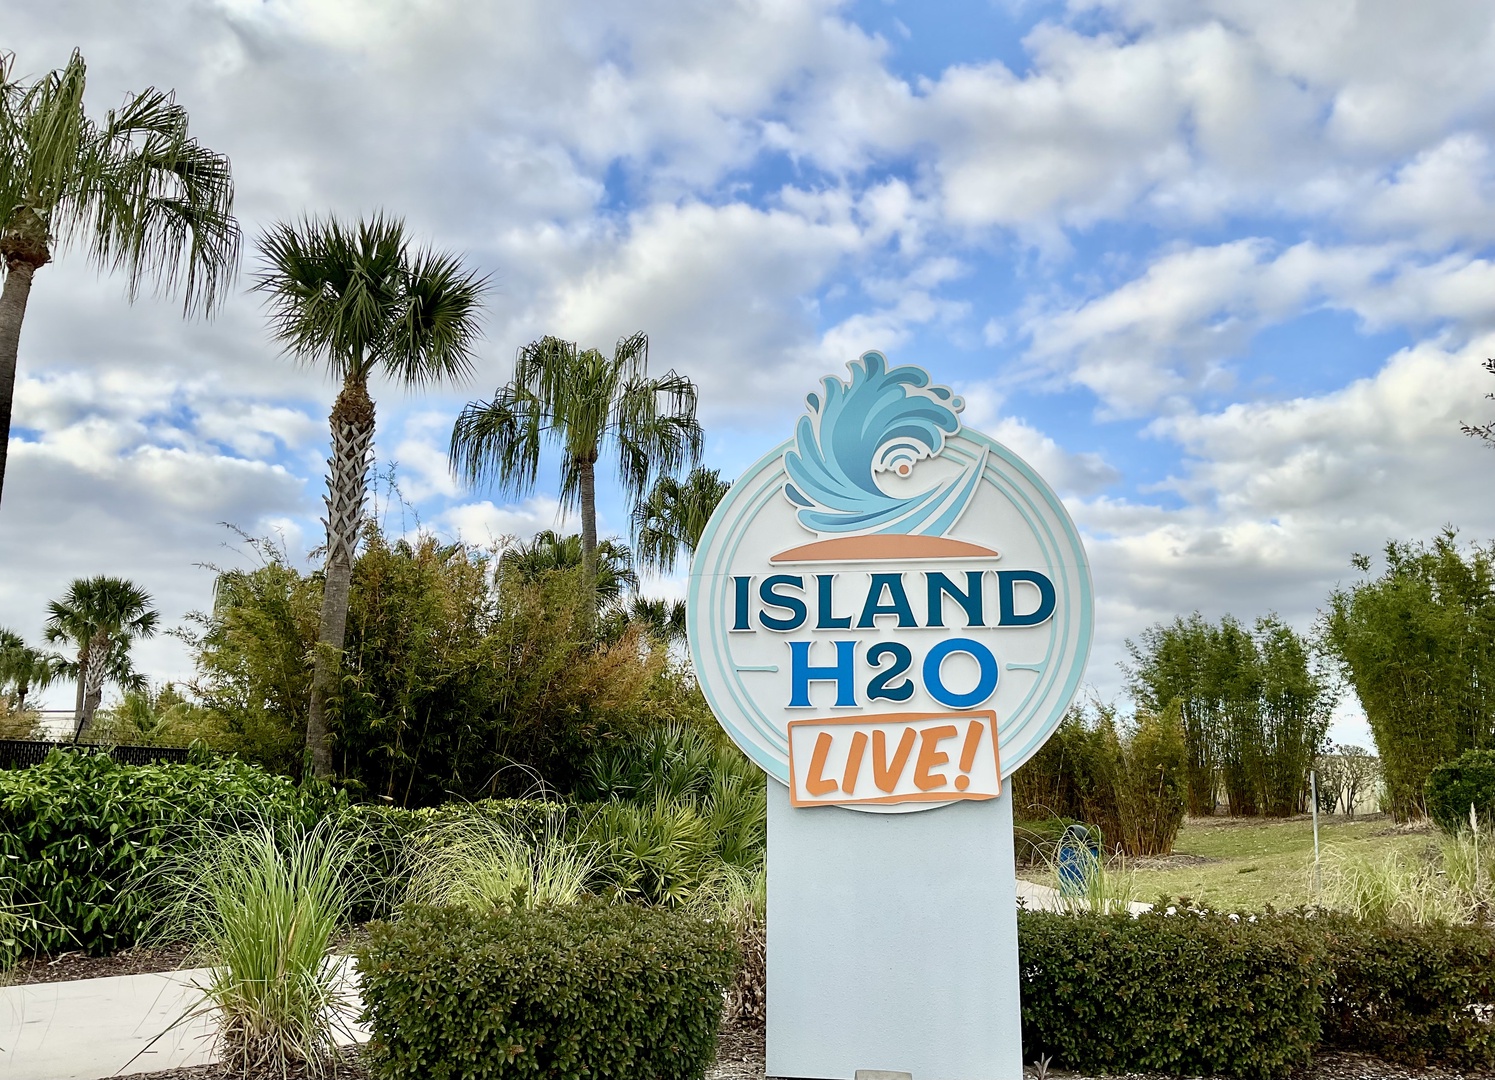 Island H20 is 2 mins from home!